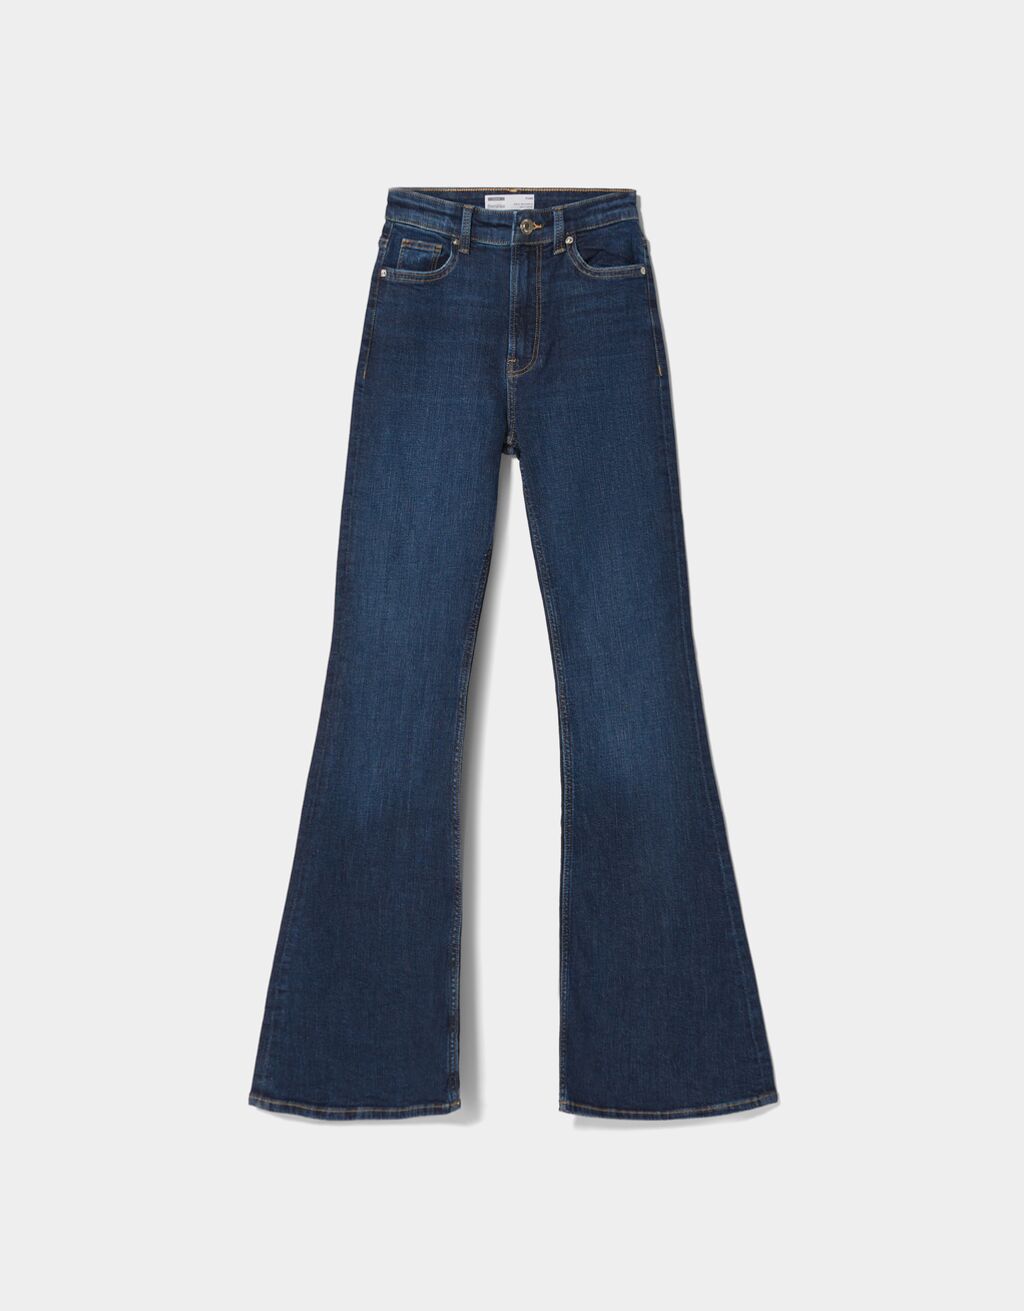 Women’s Jeans | New Collection | Bershka